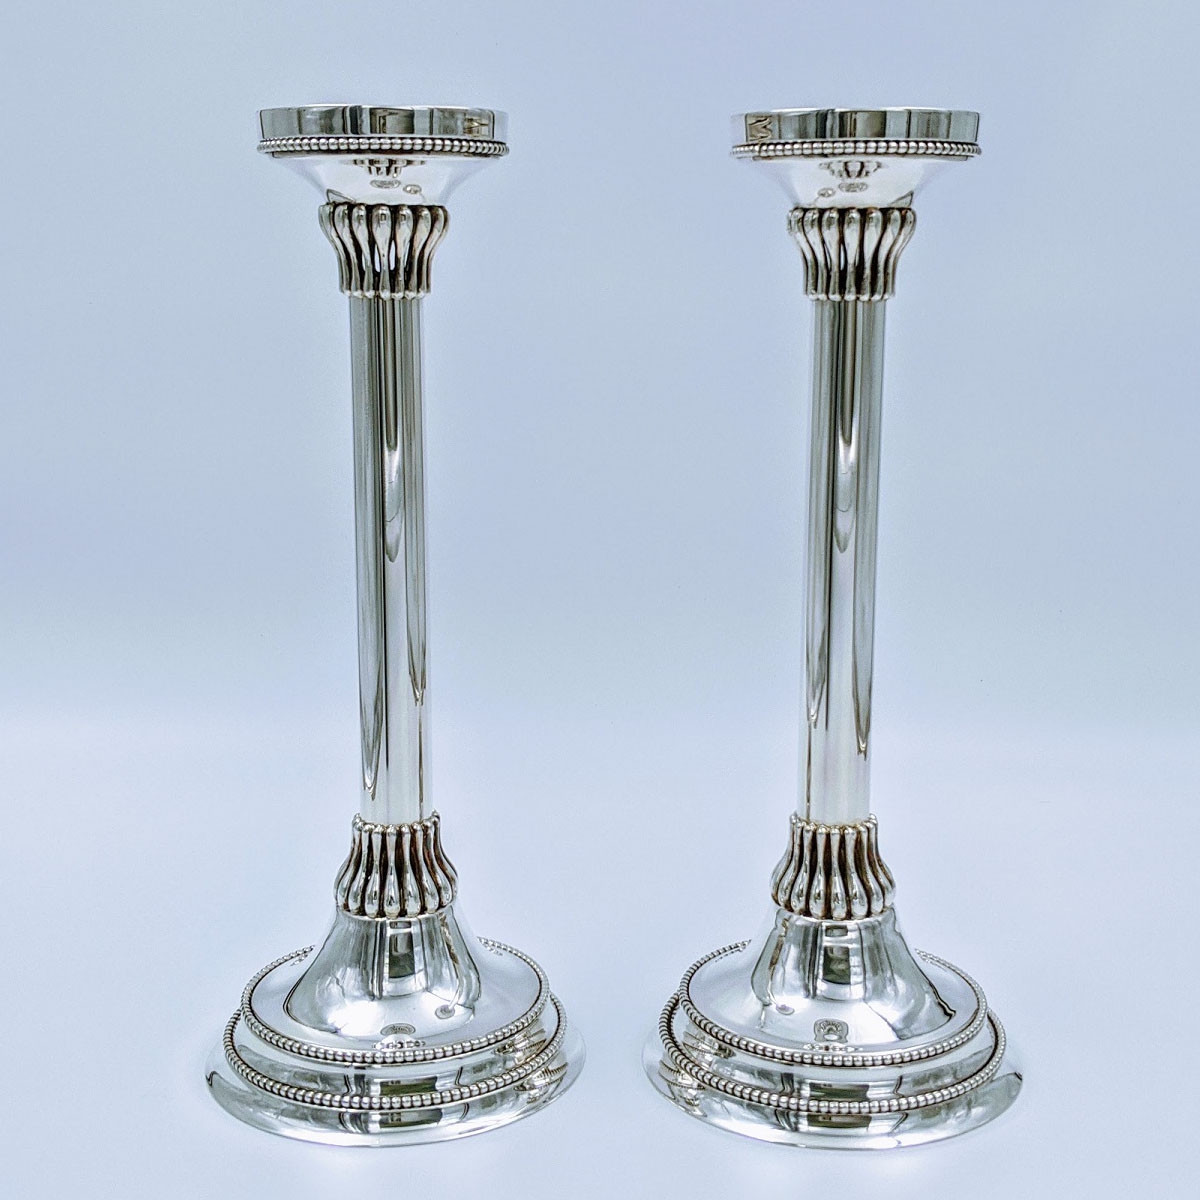 Bier Judaica Handcrafted 925 Sterling Silver Candlesticks With Pearl Design - 1